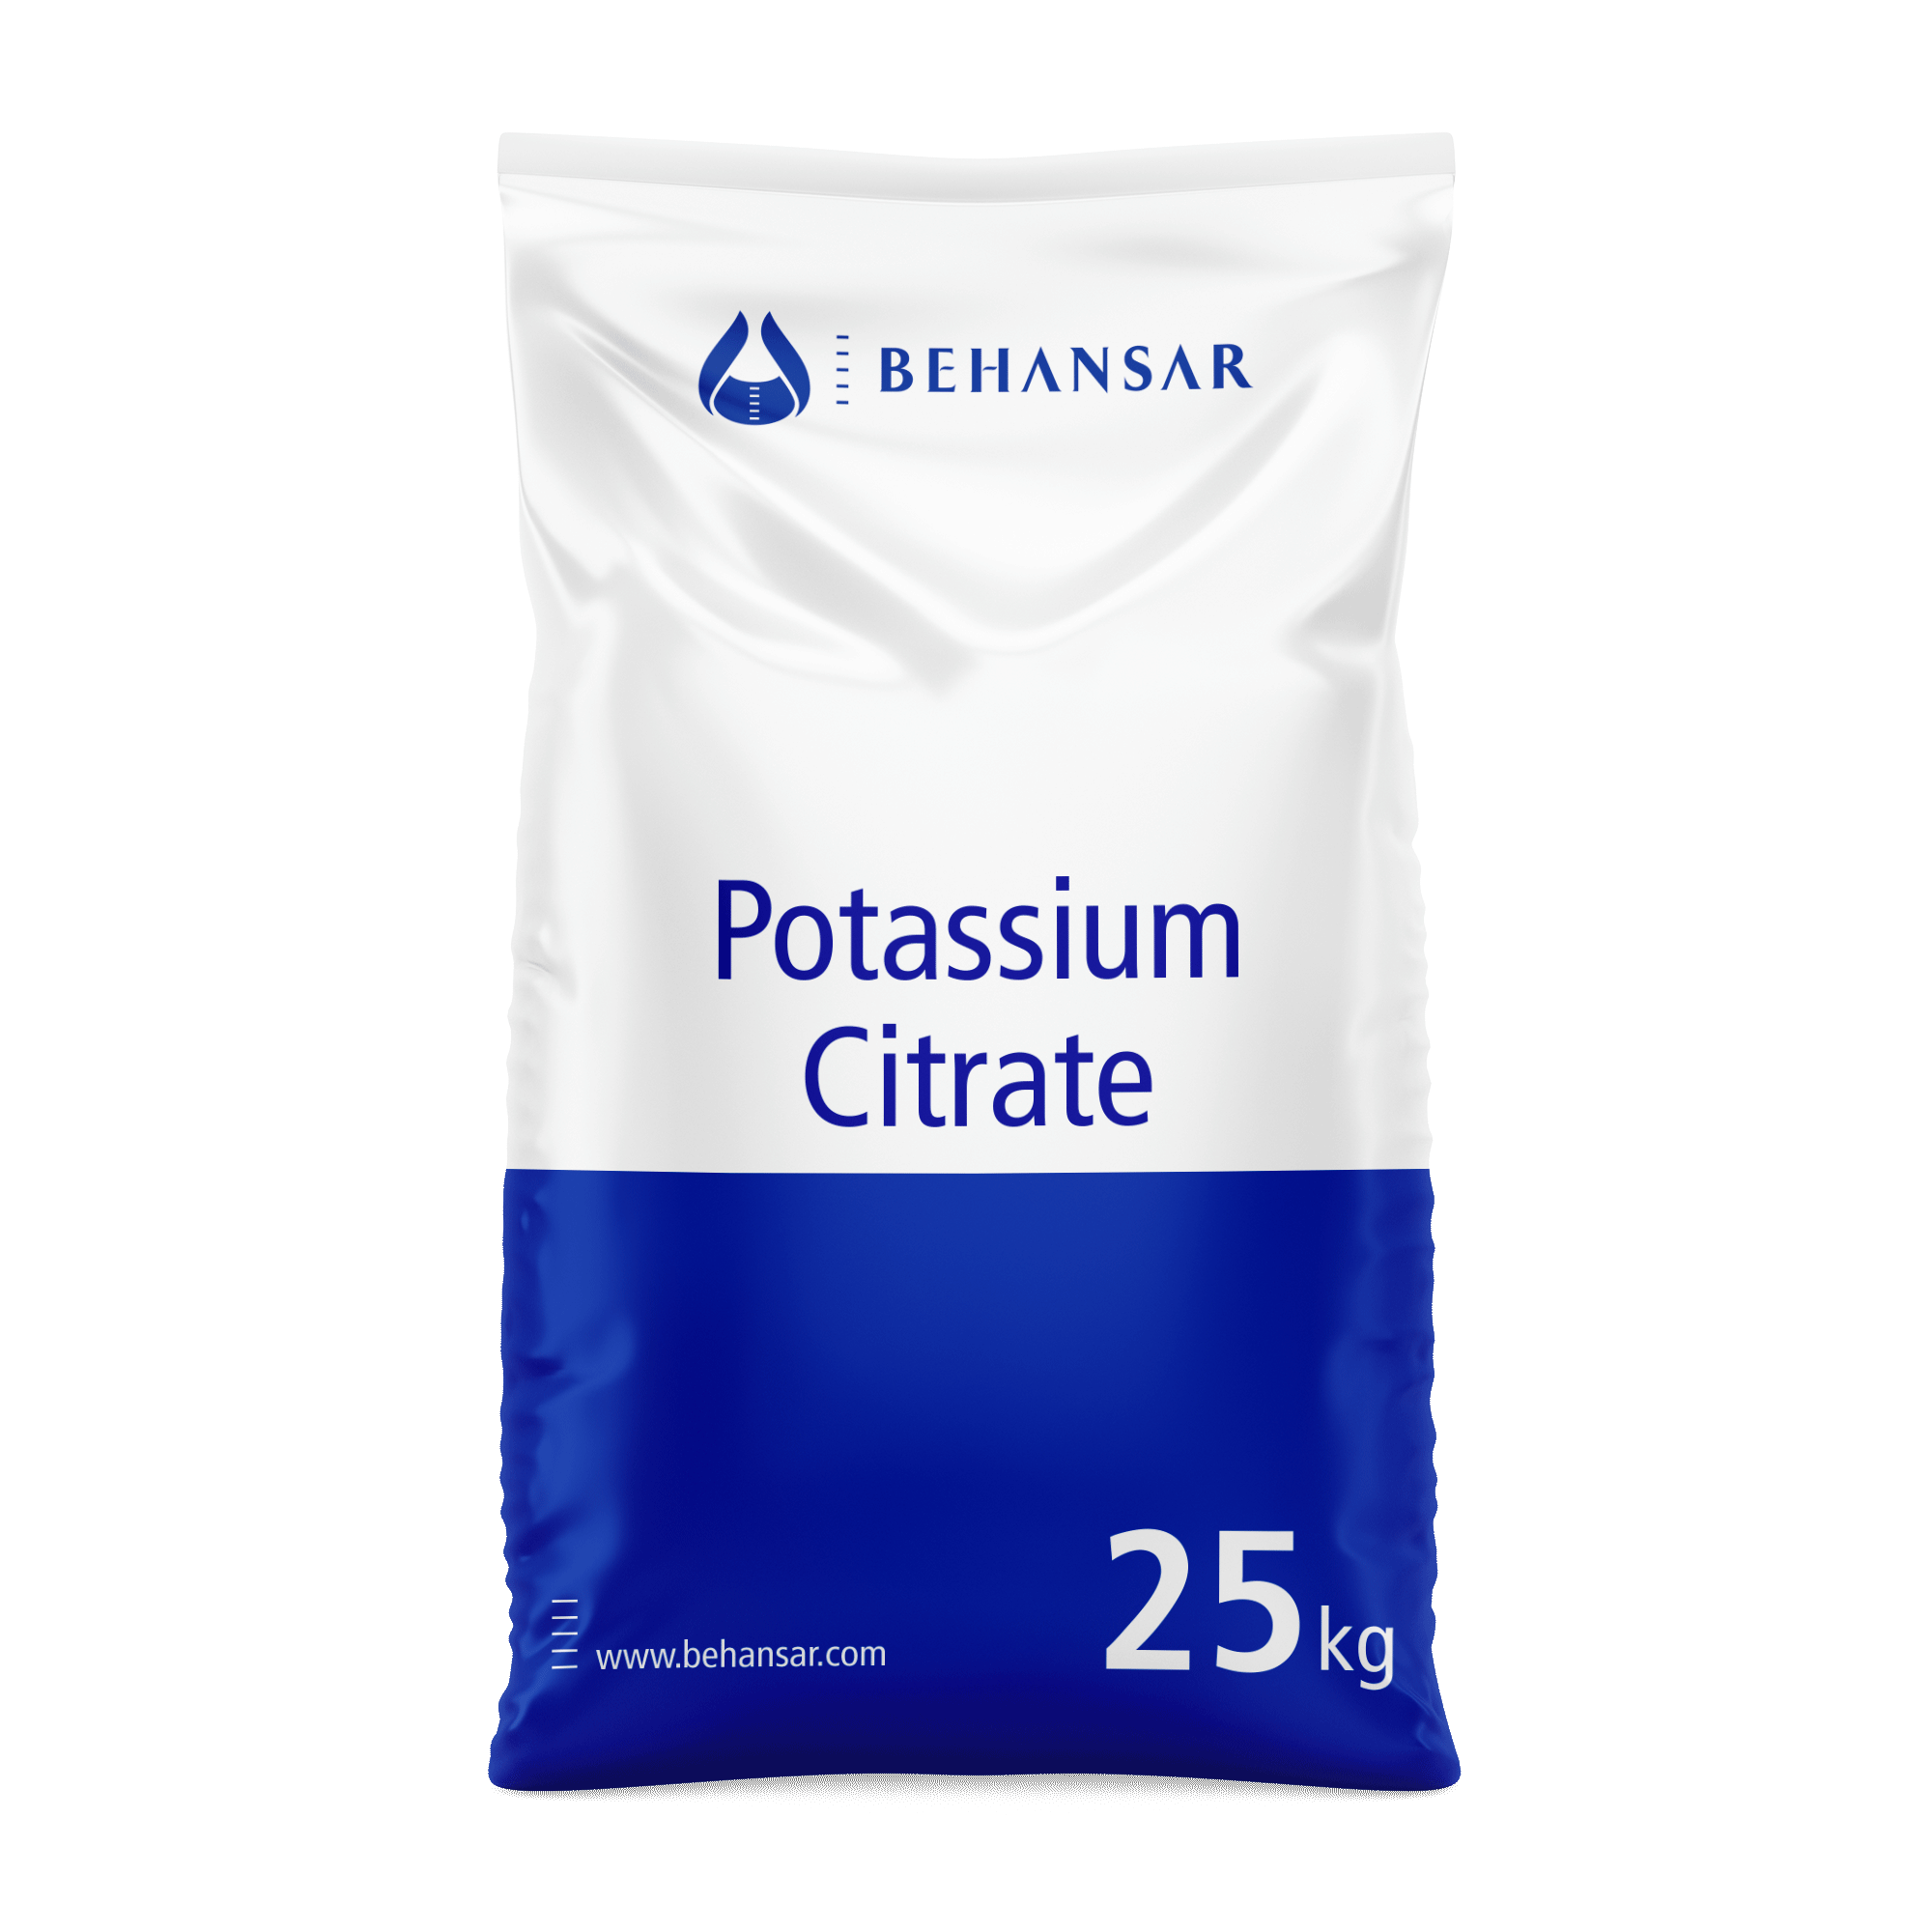 Potassium Citrate is one of the products of Behansar Co